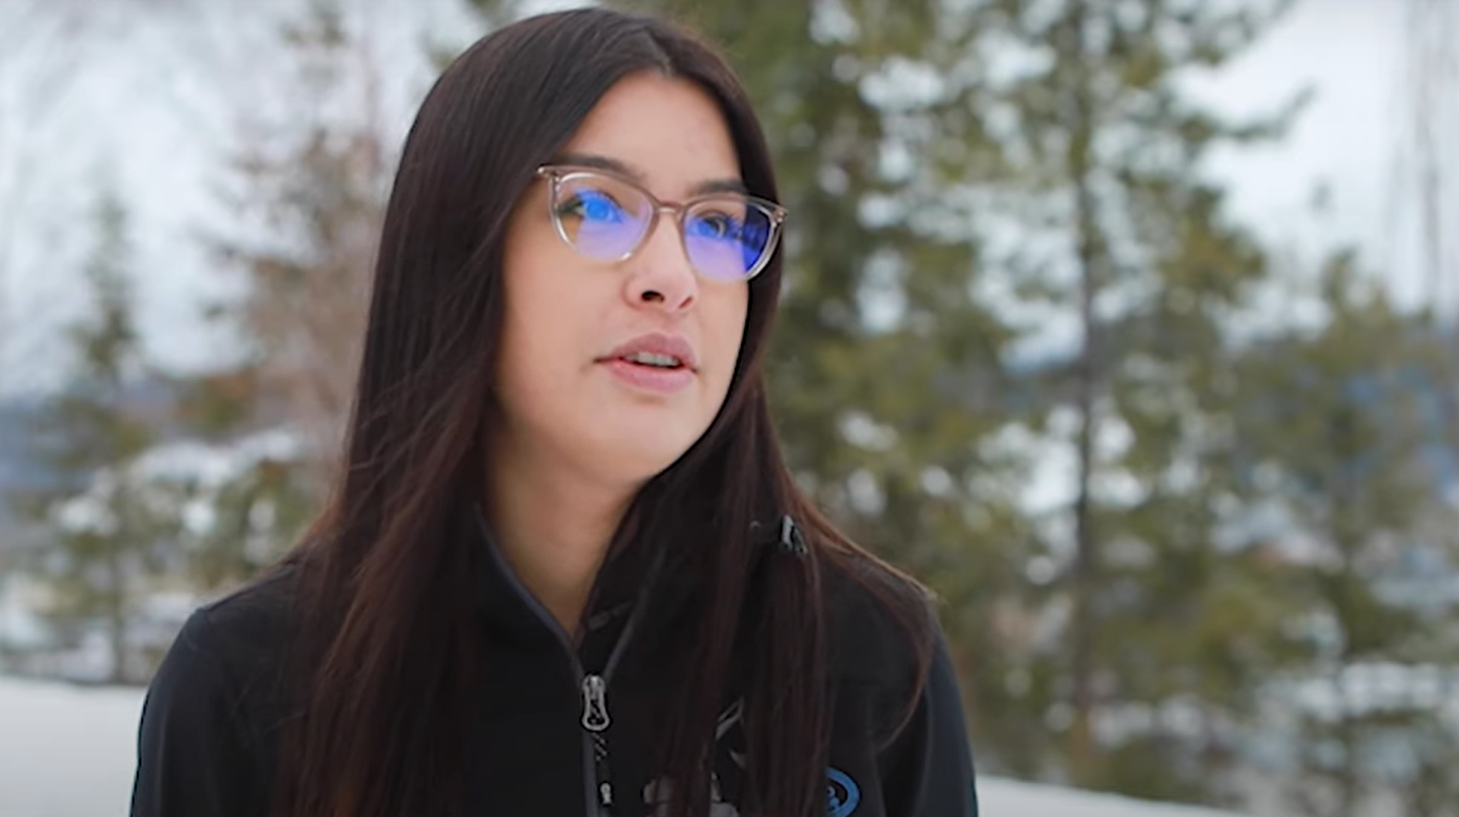 A young woman with black hair and glasses speaks with trees and snow out of focus behind her.